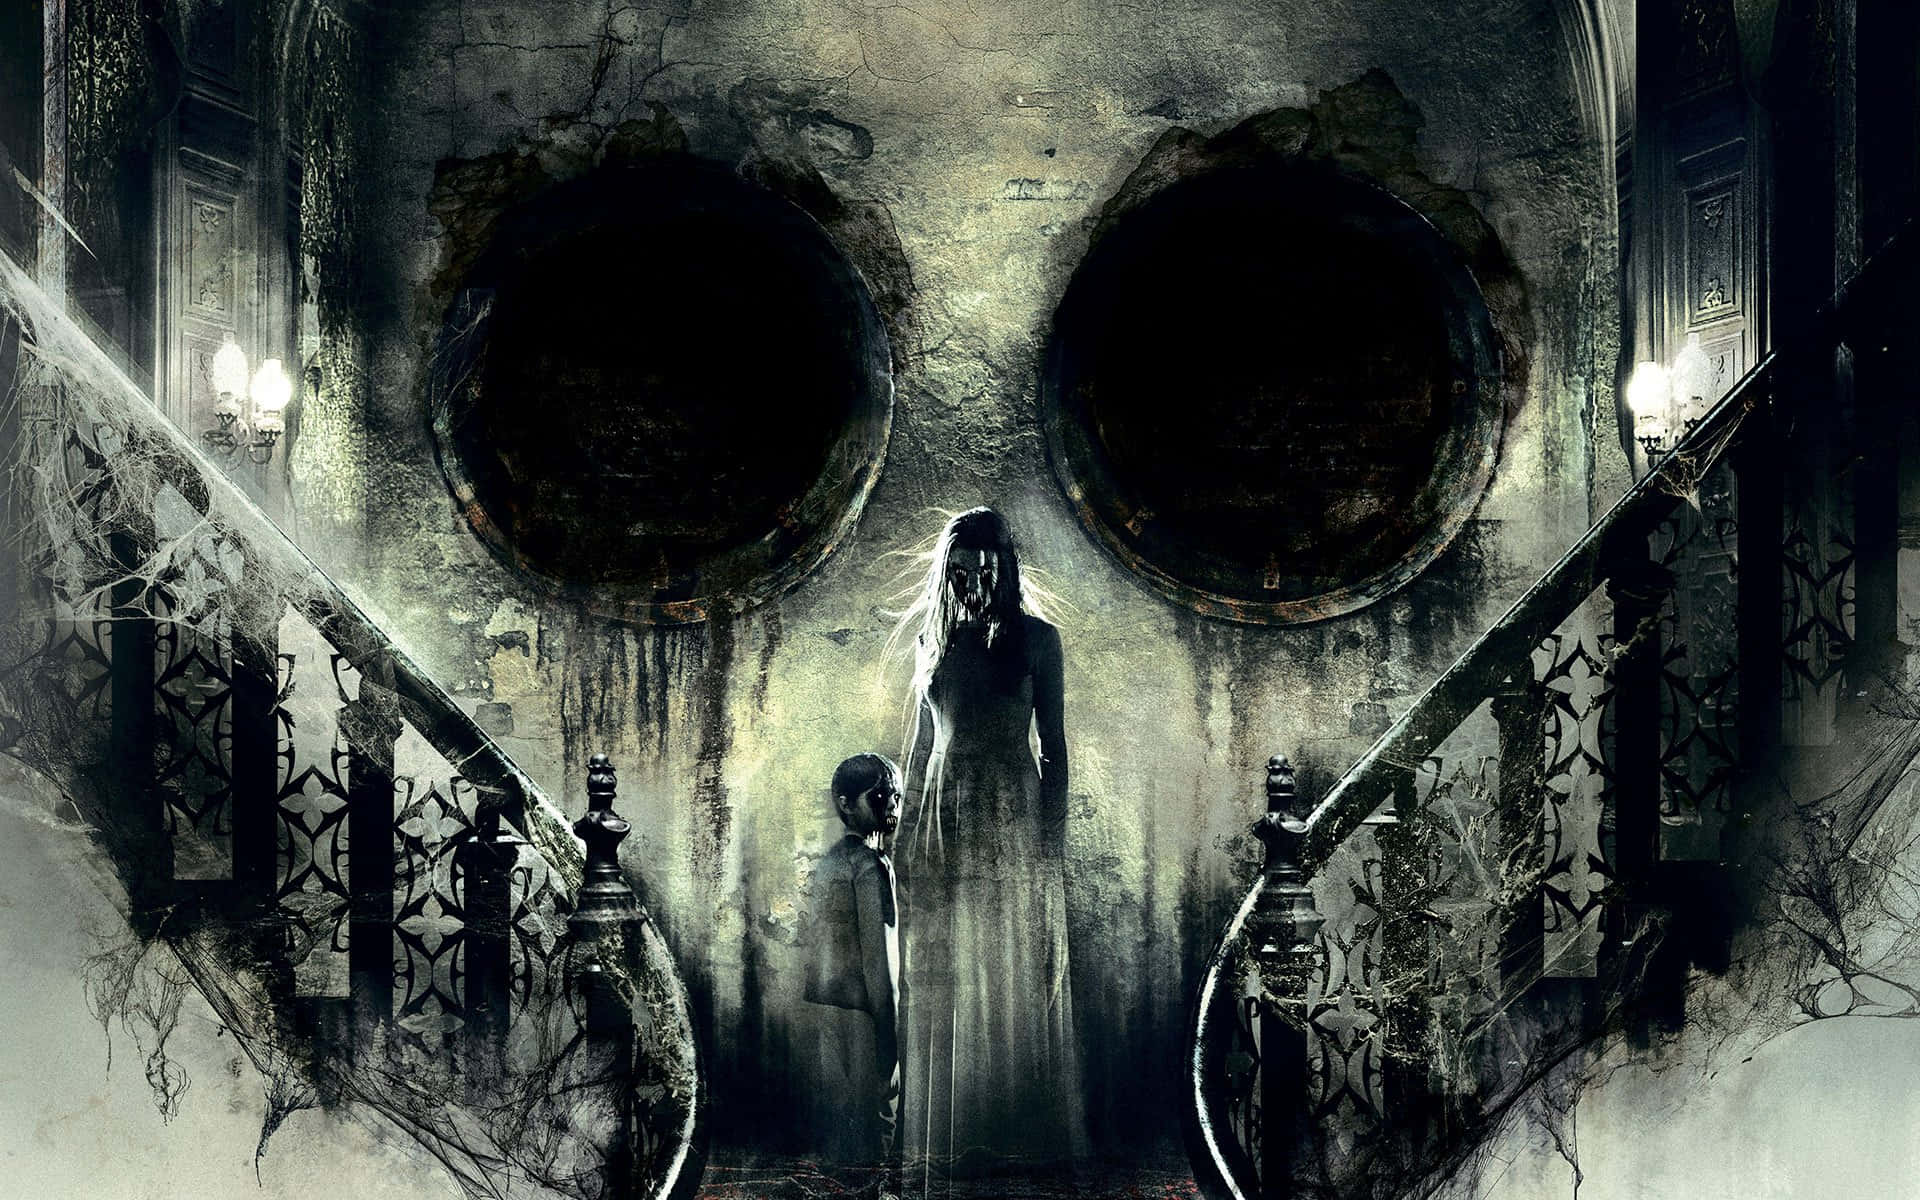 A Creepy Image Of A Woman And A Skull